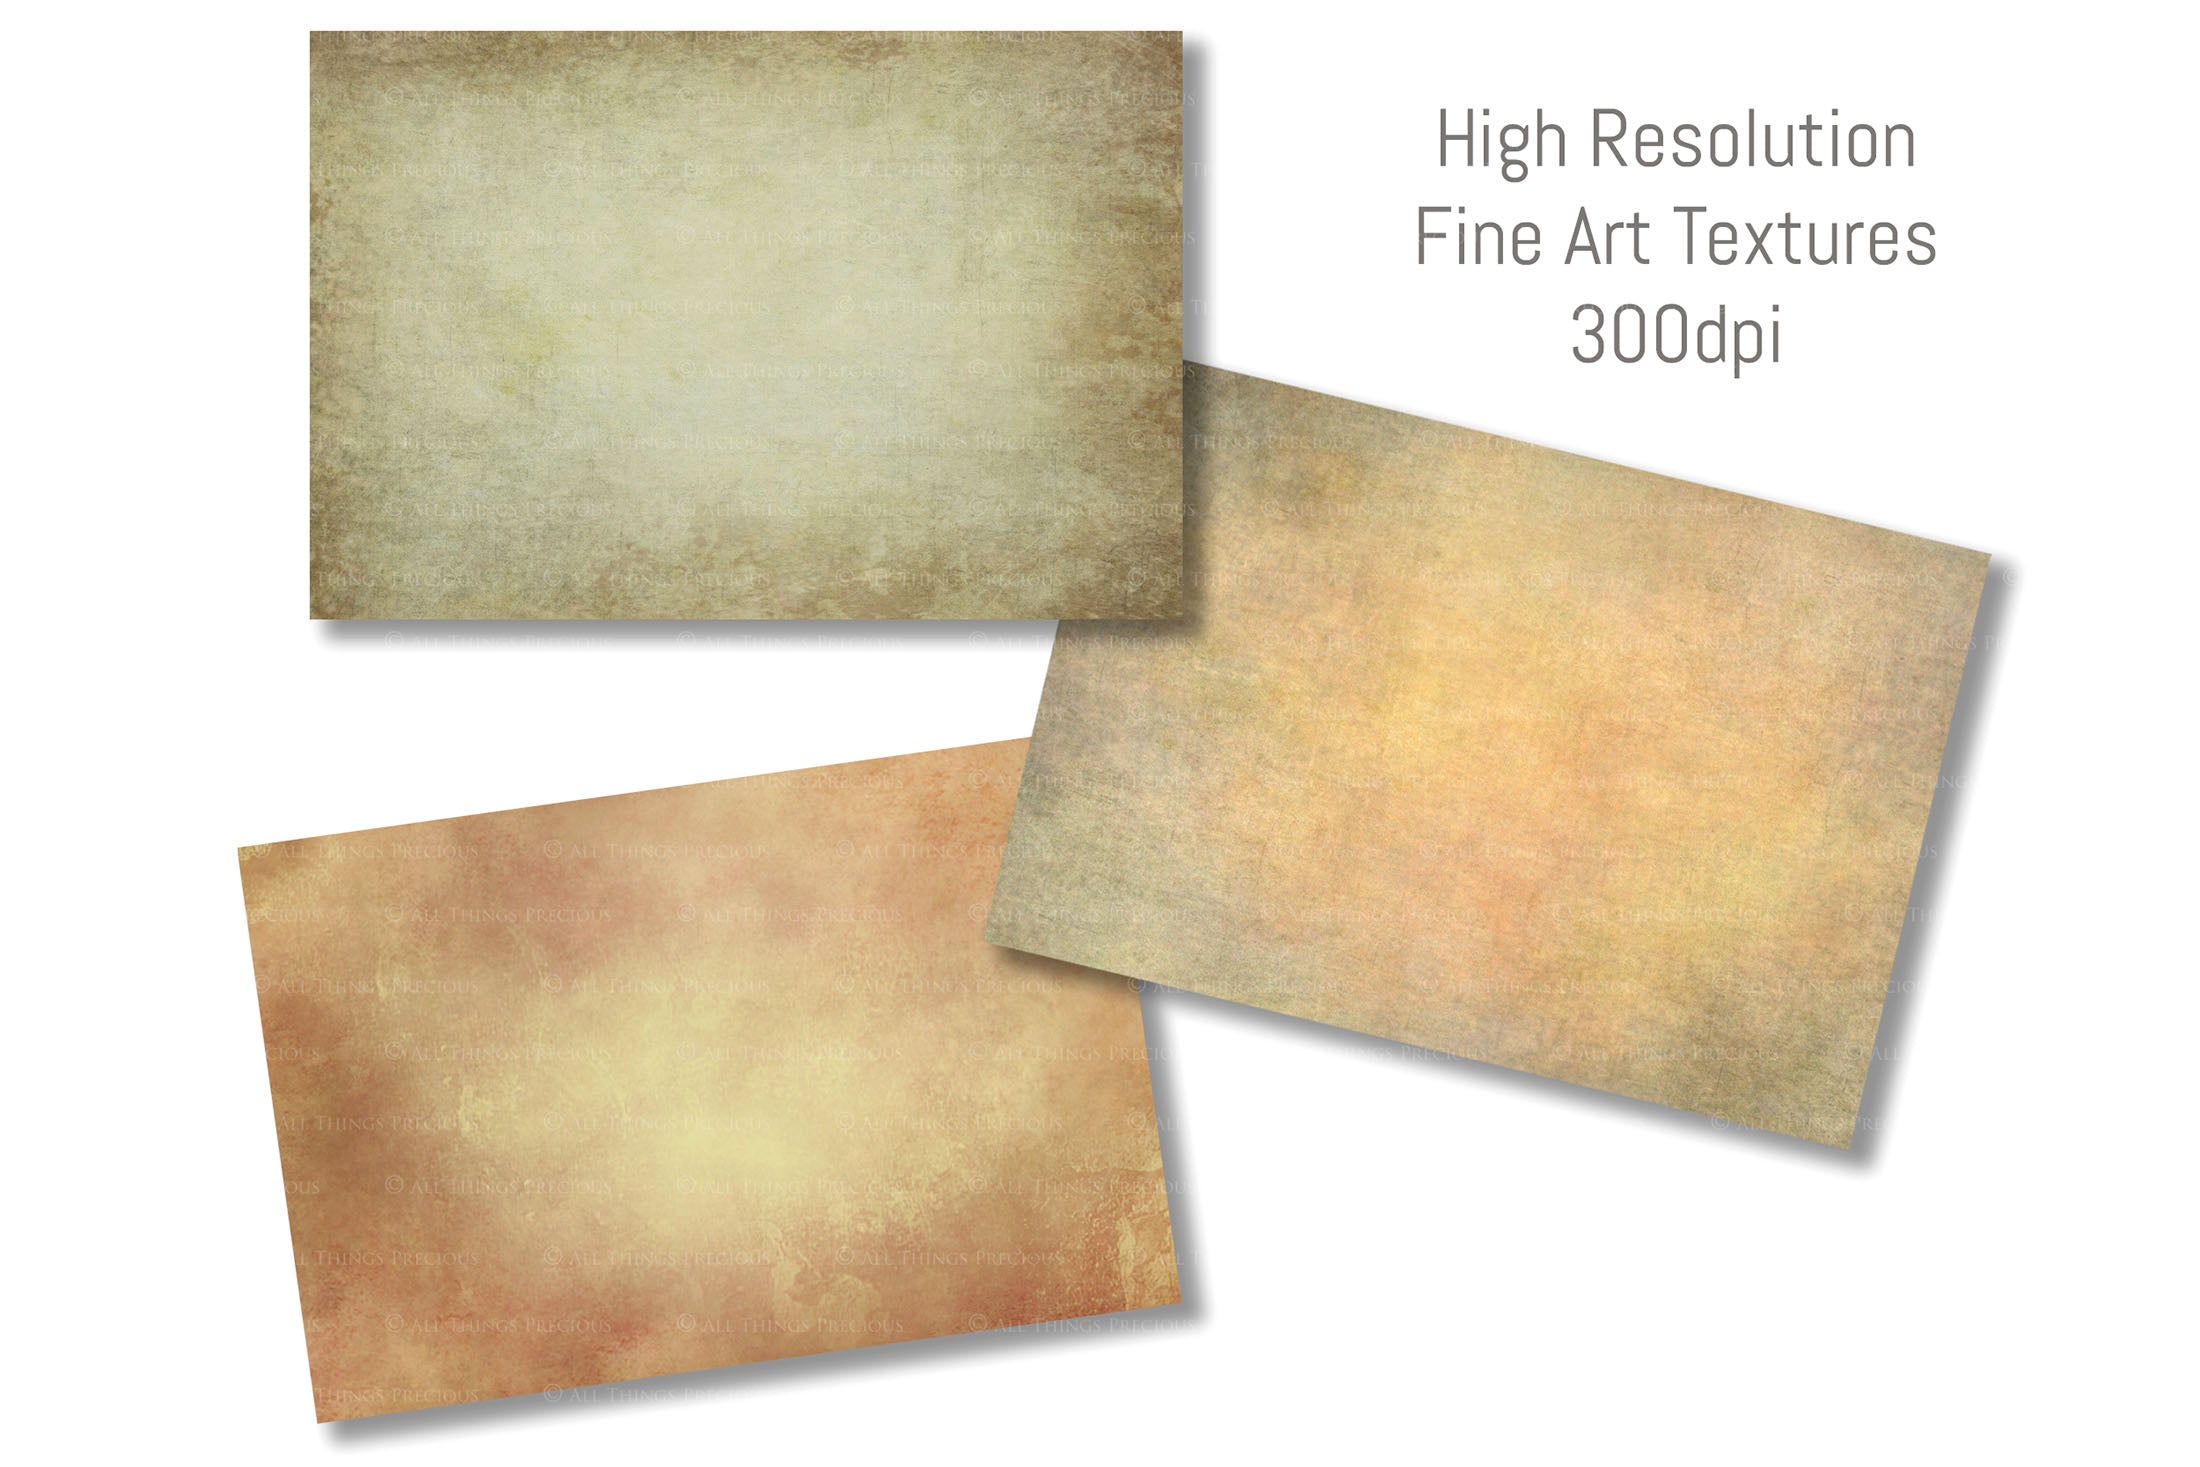 Fine Art Textures for photographers and digital editing. Photo Overlays. Antique, Vintage, Grunge, Light, Dark Variety Bundle.  Textured printable Canvas, Colour, Monochrome, Bundle. High resolution, 300dpi Graphic Assets for photography, digital scrapbooking and design. By ATP Textures